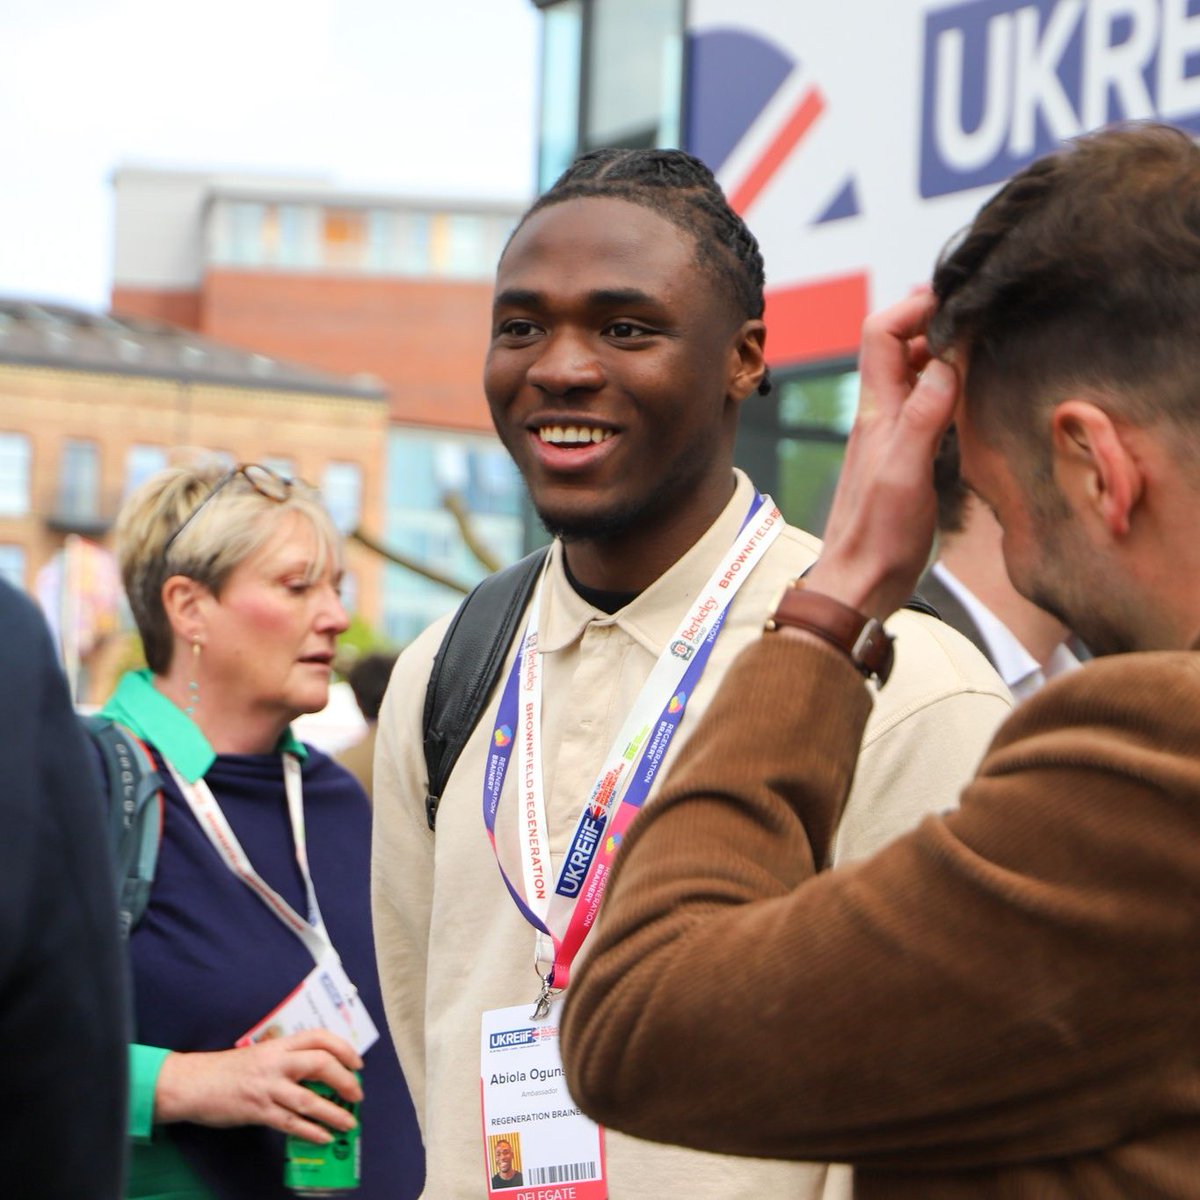 Mark your calendars, we've got an epic line-up of events for @UKREIIF! ↔️Reverse mentoring- 22nd, 14:00* 🗣️Bury Theatre Main Stage- 22nd, 17:00 🧠Meet the Brainees- 21st & 23rd 14:30 Swing by the Regeneration Brainery Studio for a chat with our Brainees! *Invite only